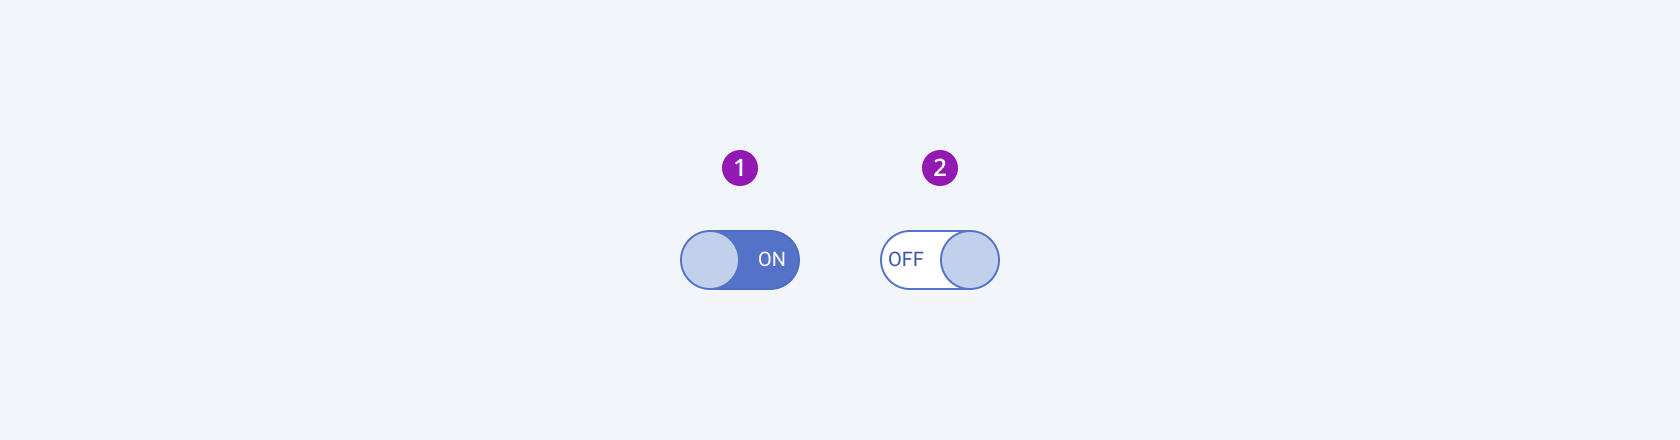 A Telerik and Kendo UI Switch component in on and off states demonstrating the right-to-left option.